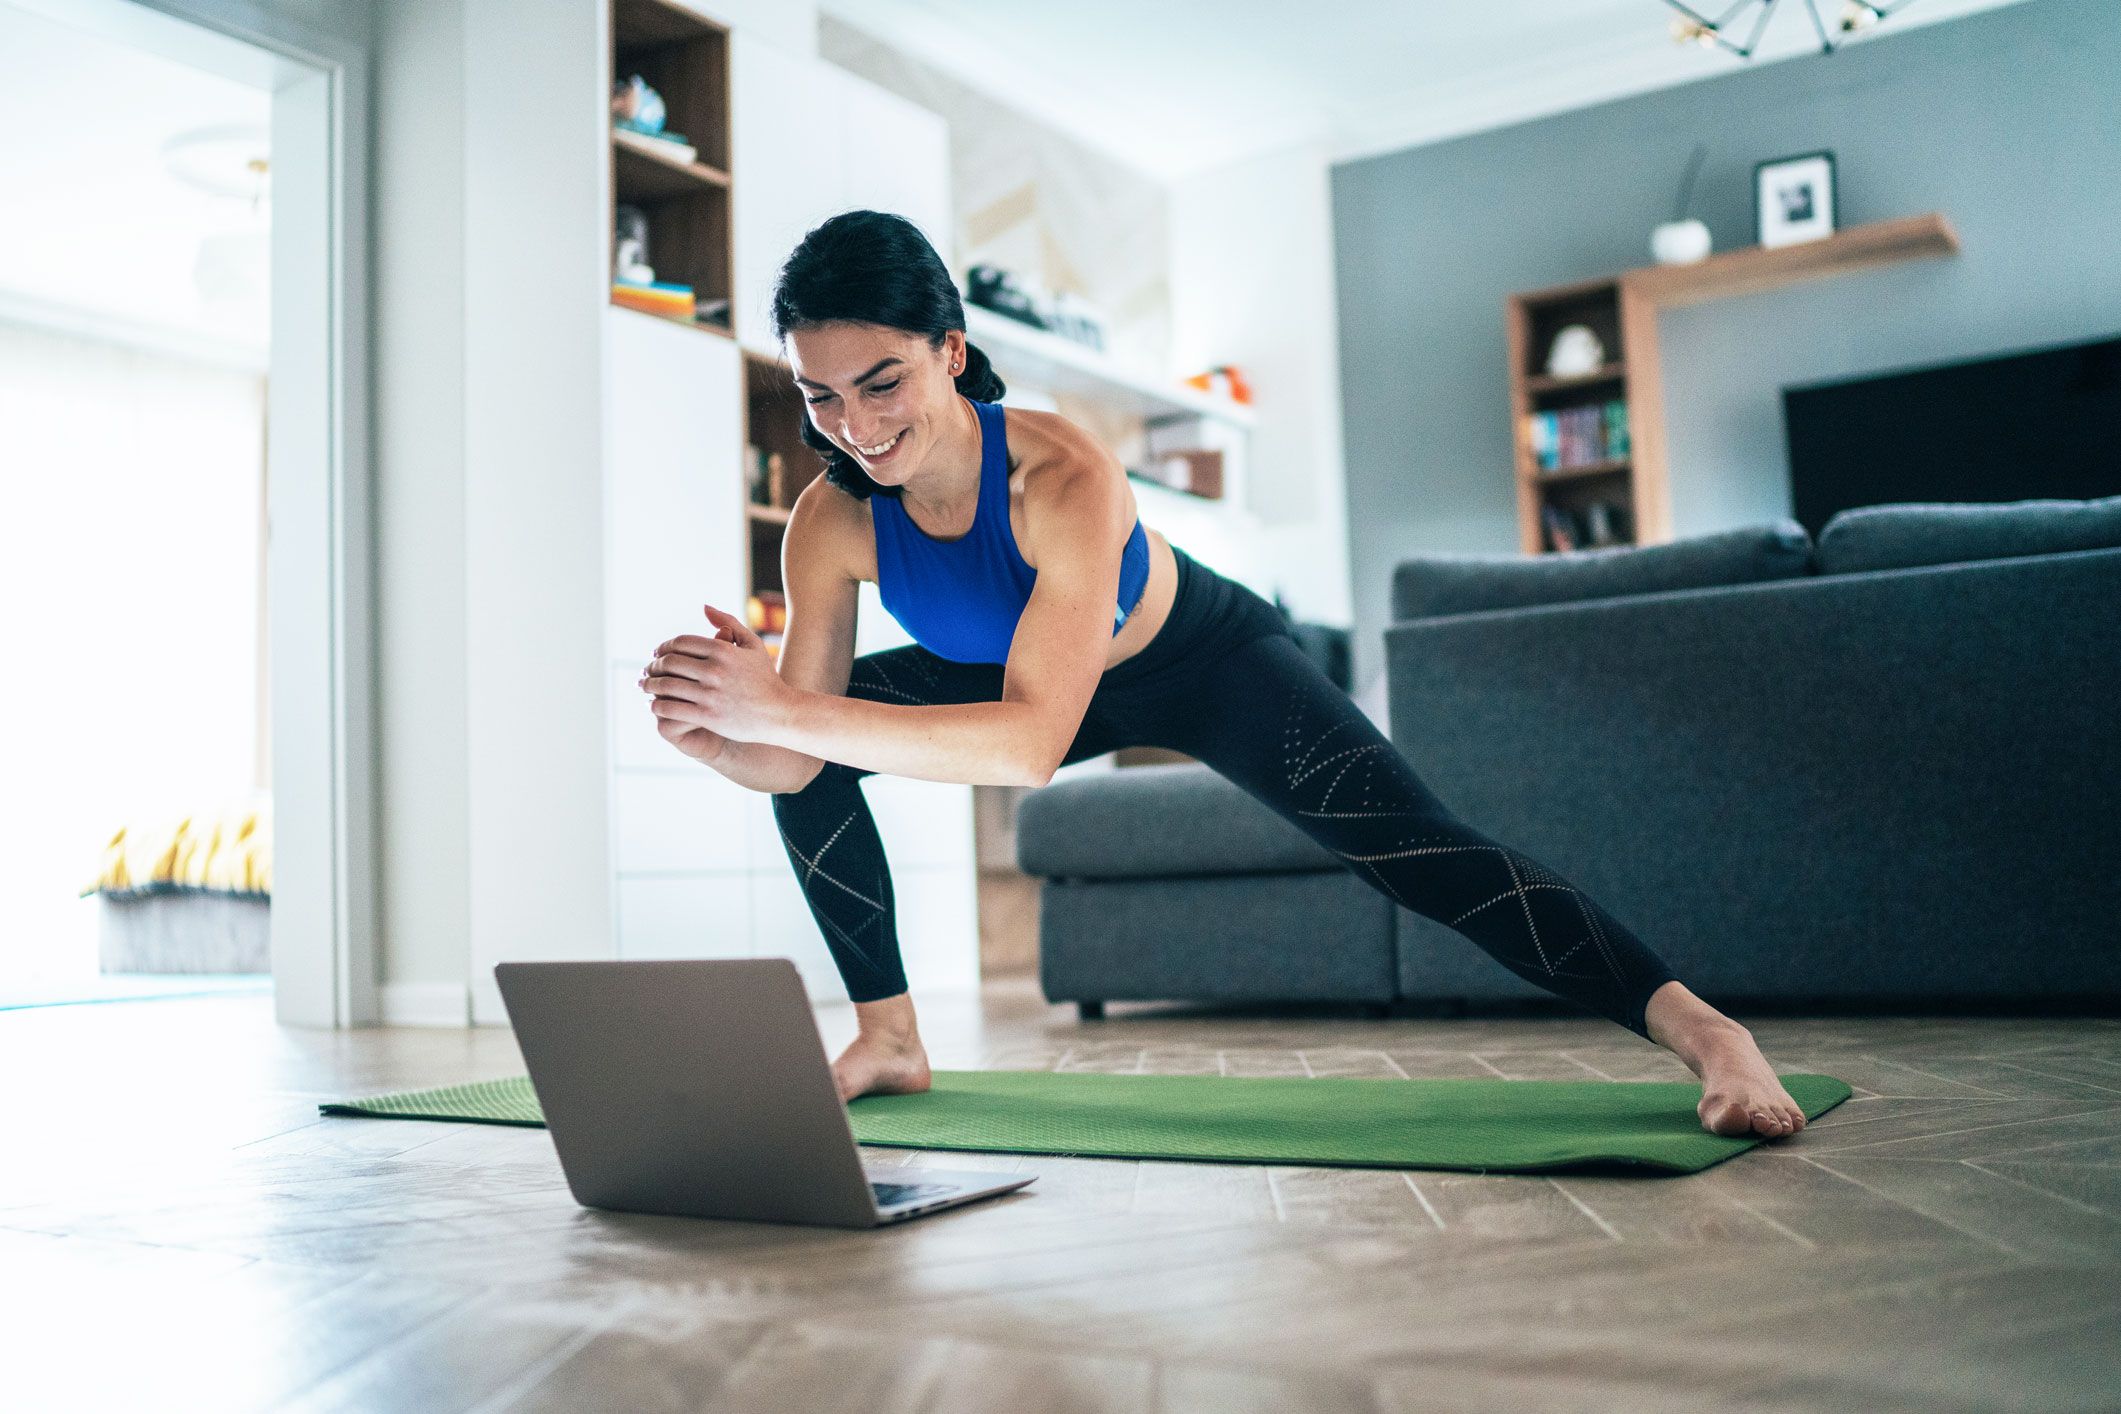 30 Pilates Videos To Stream For Free – Top Pilates  Channels